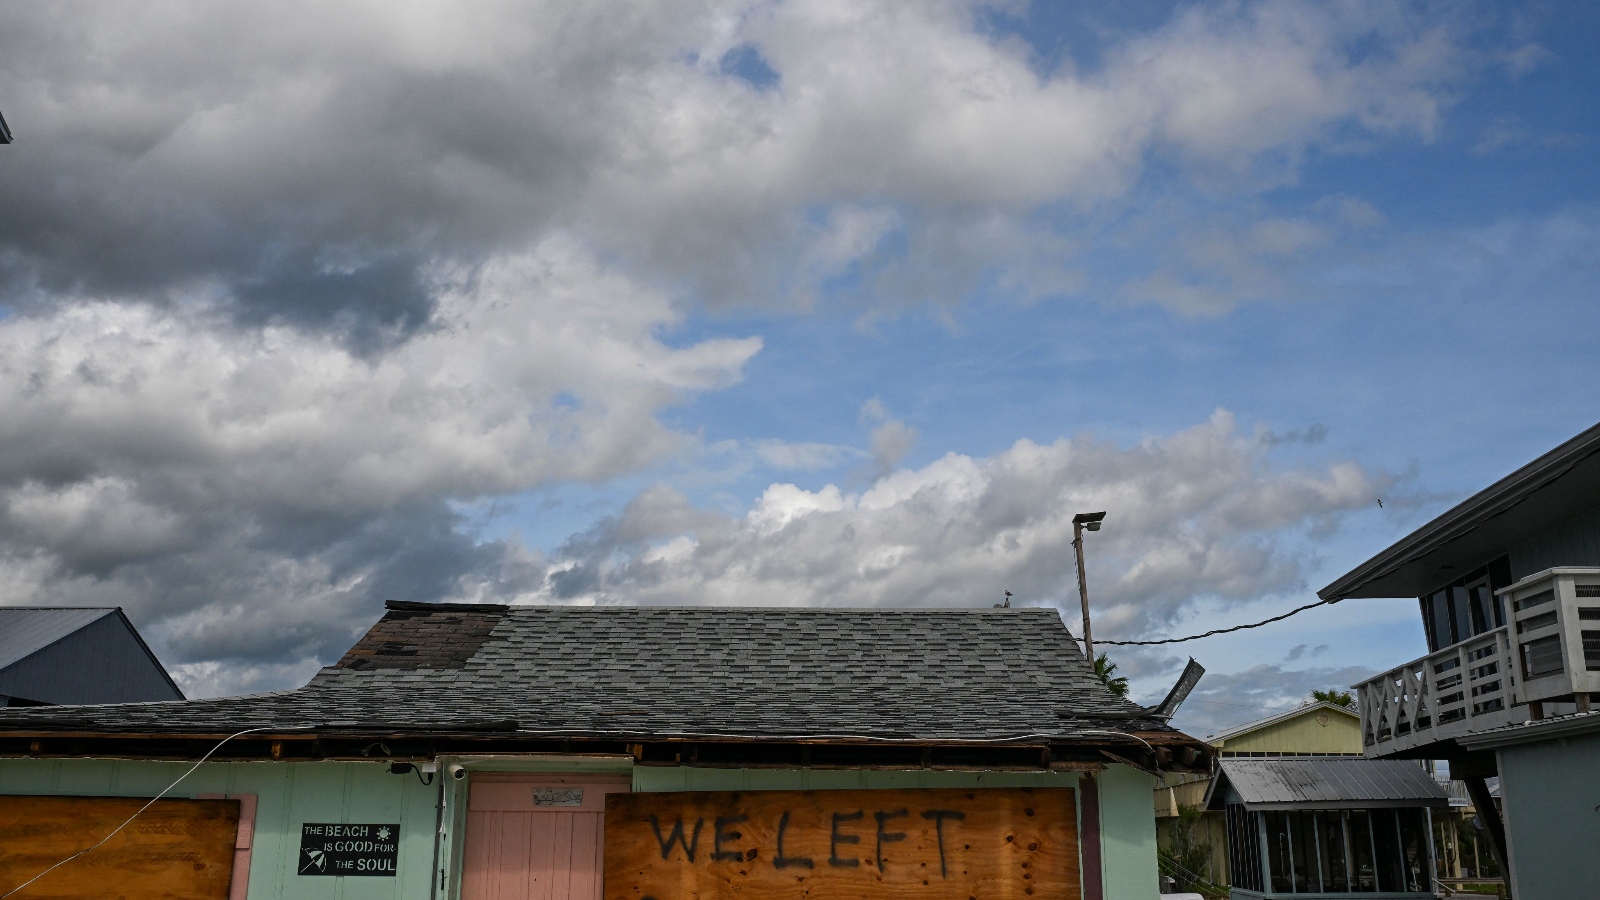 A pastel green house is boarded up after Hurricane Idalia made landfall in Florida. The board reads WE LEFT under a slightly damaged roof. The sky is blue with large, white clouds.